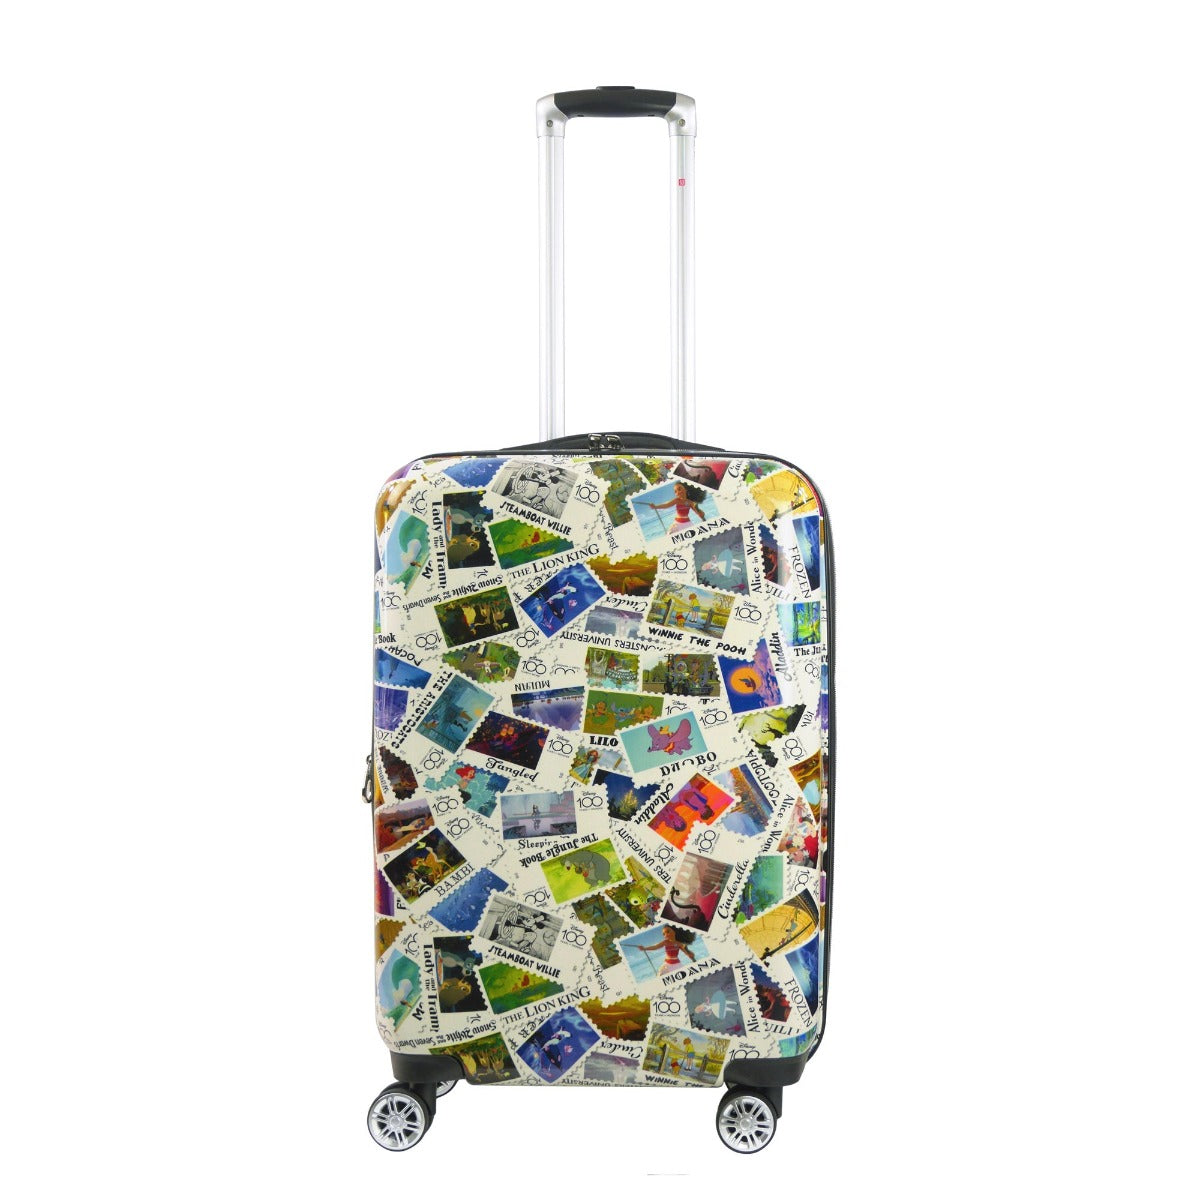 Suitcase with stickers by @frankes, Suitcase with travelling